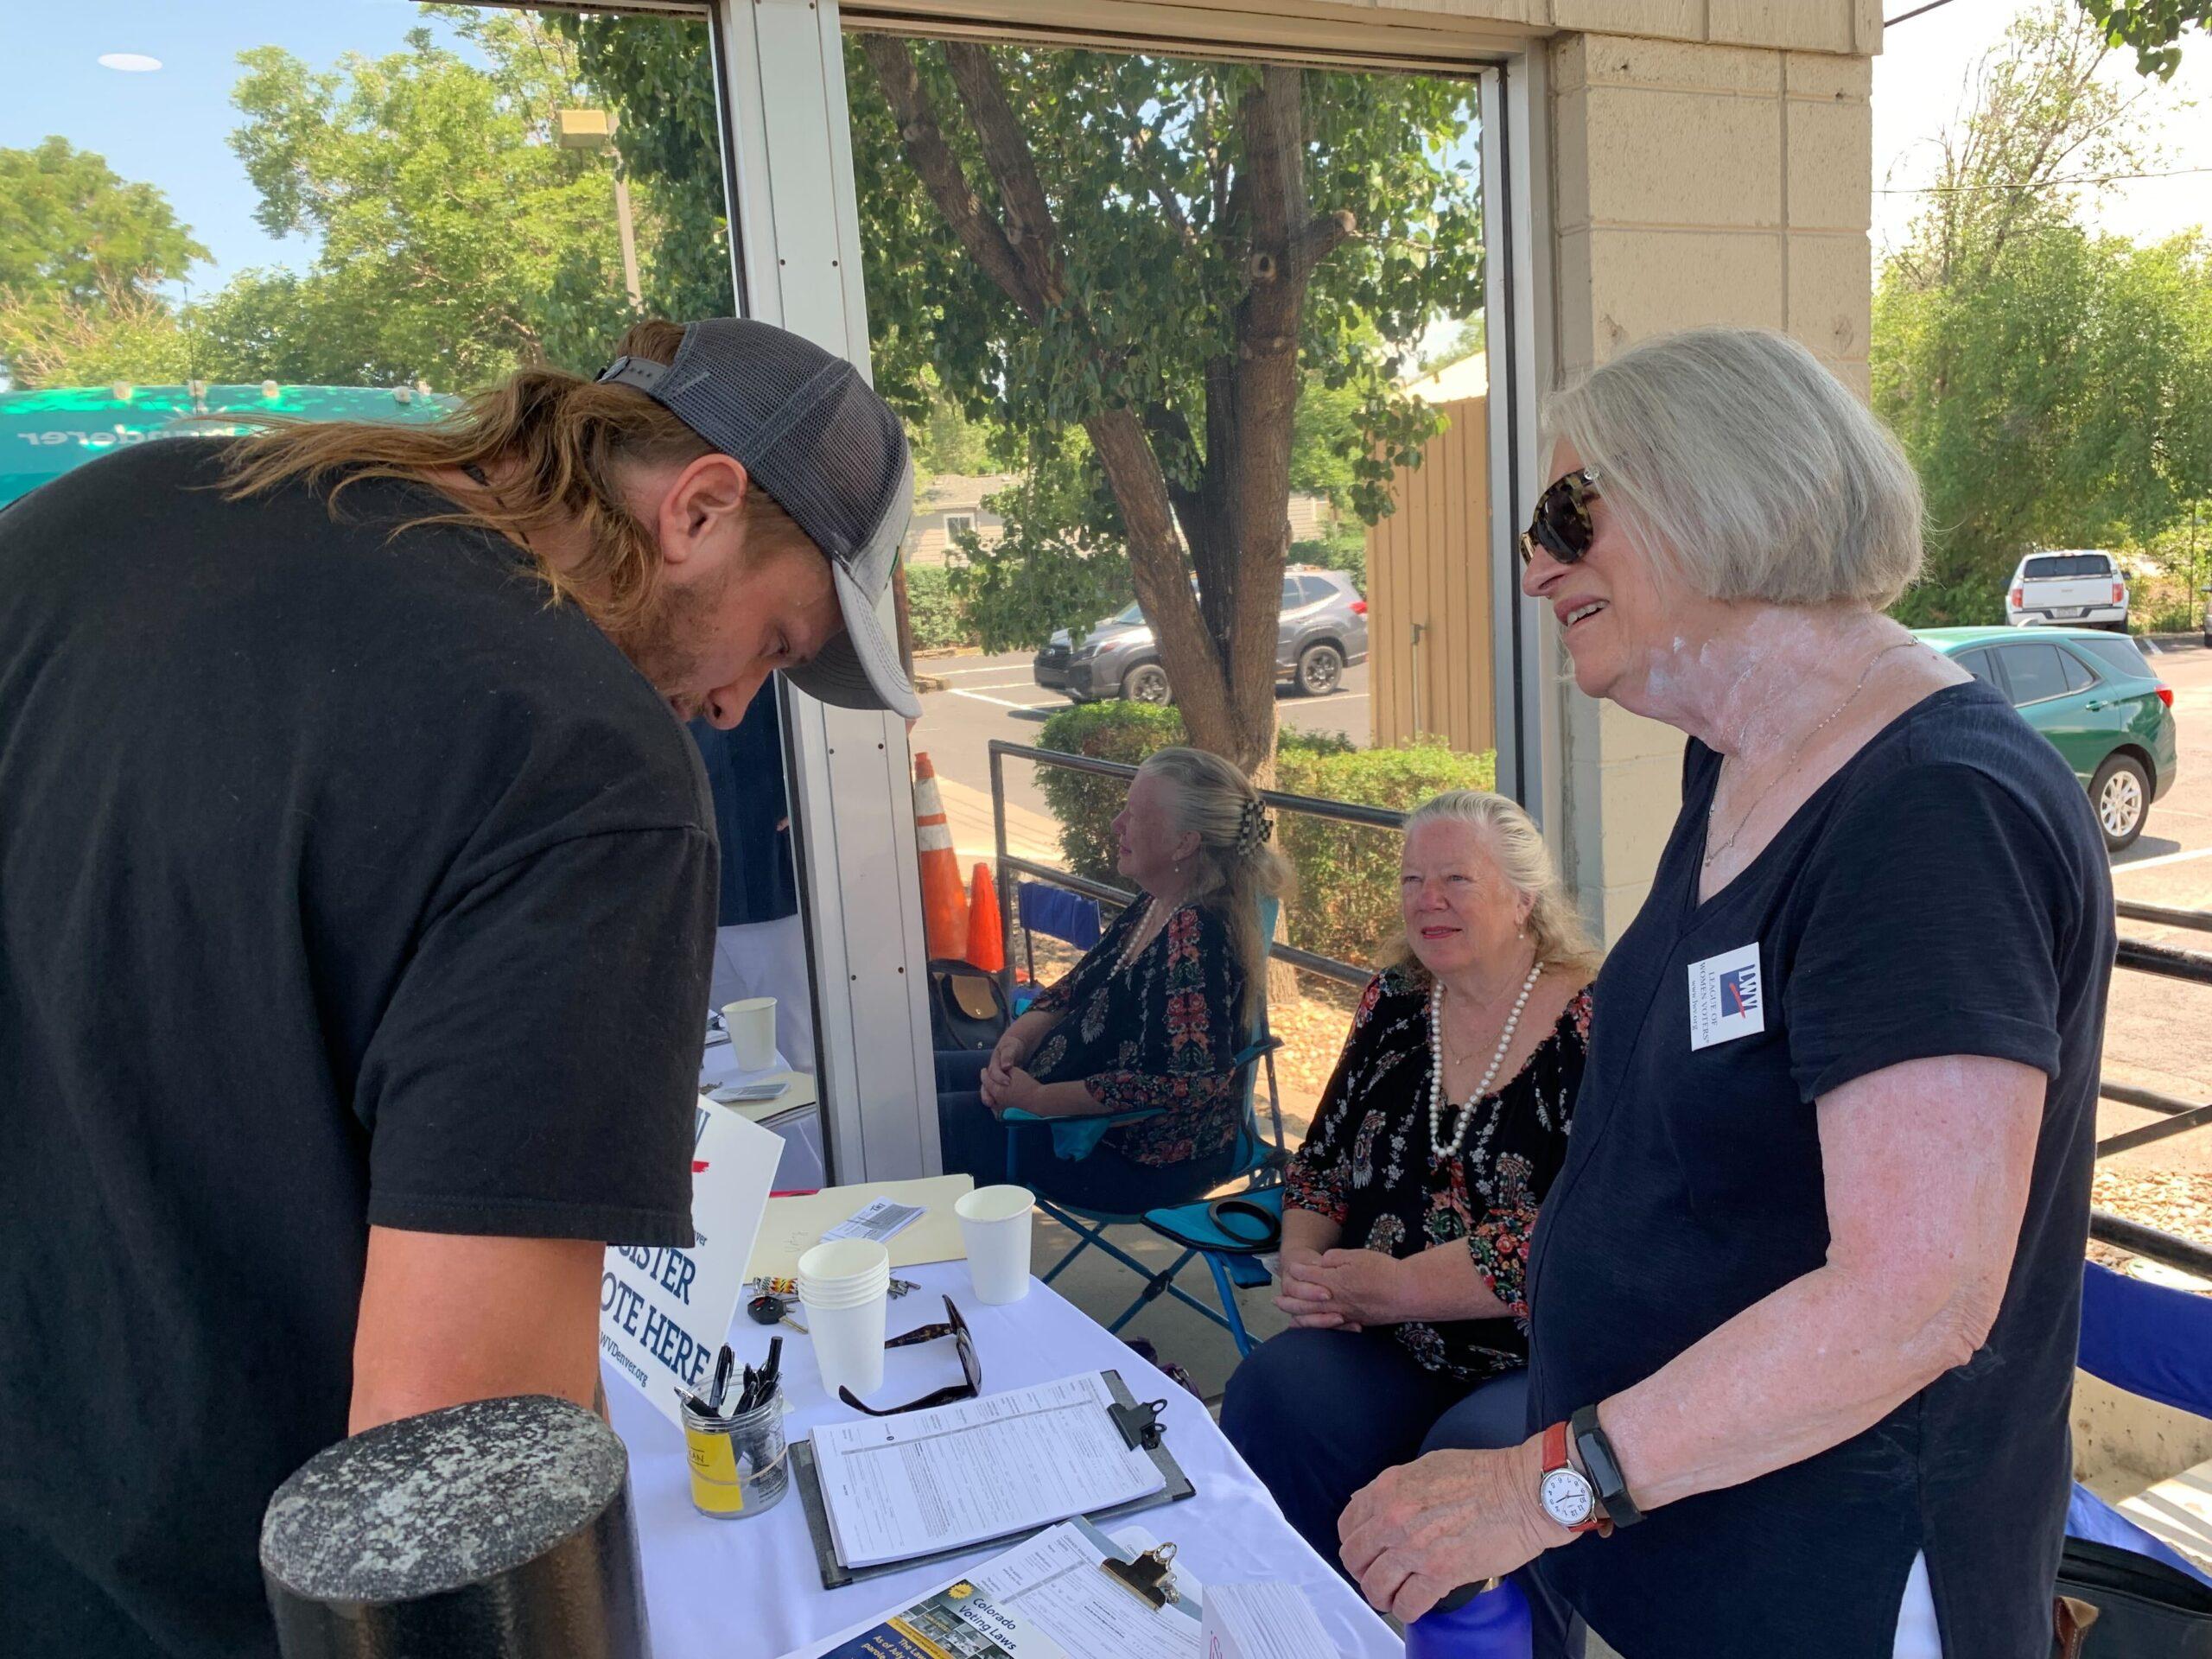 Elizabeth Bennett (sitting) and Anne Duncan (standing) are with the League of Women Voters and registered people to vote Thursday, Aug. 4 2022.